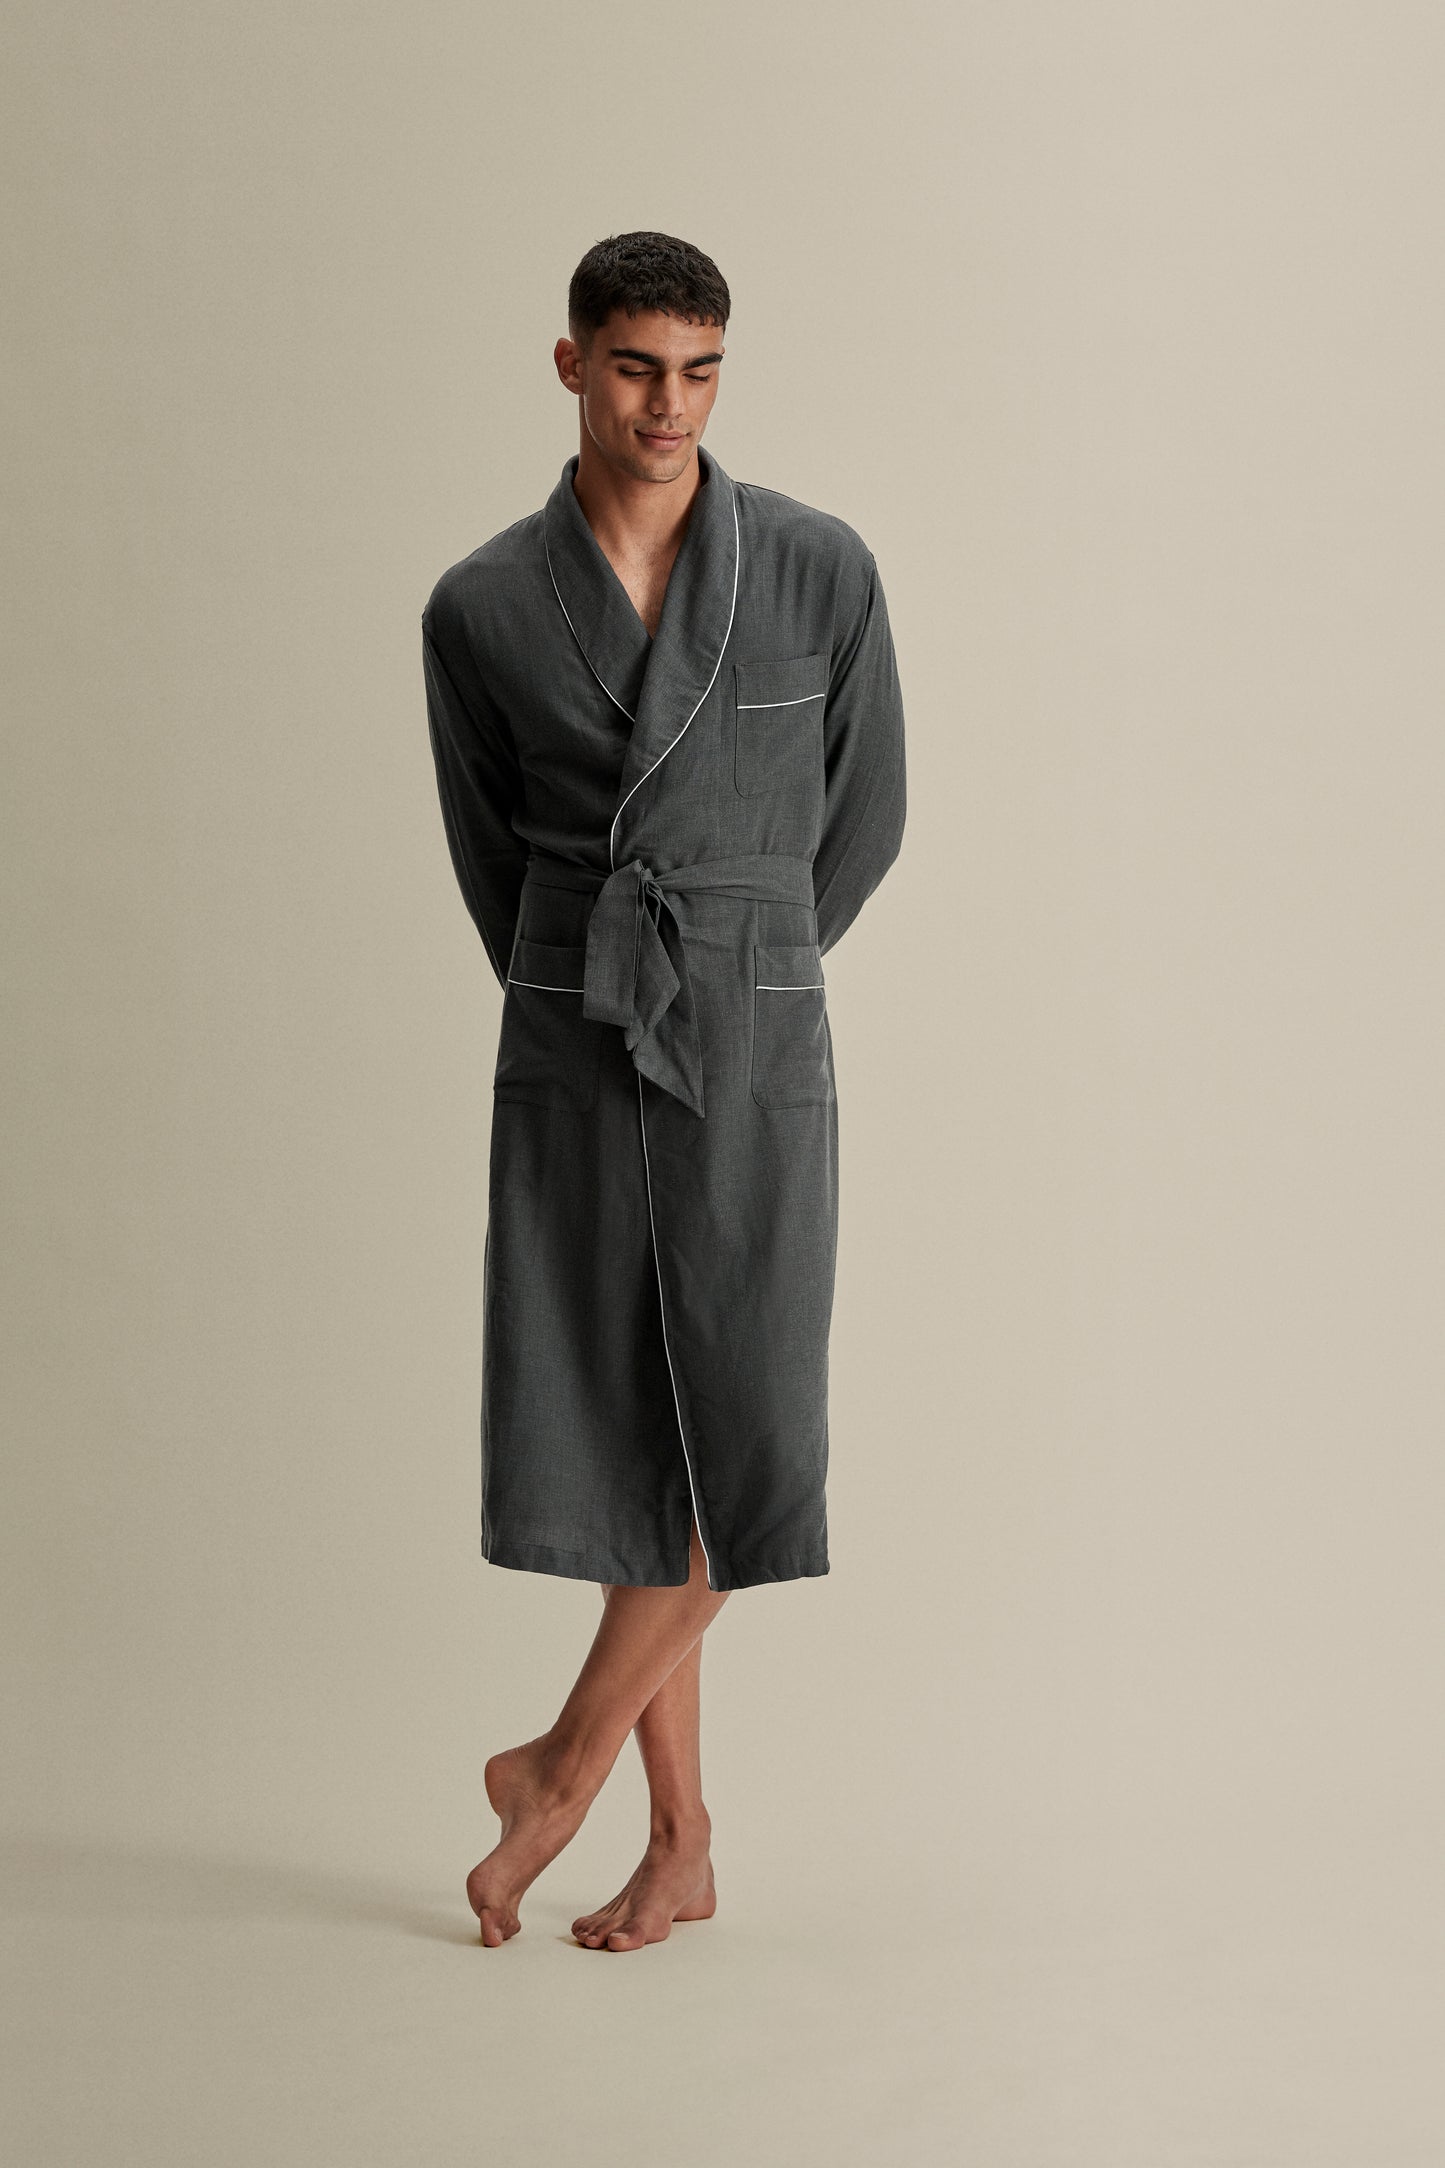 Brushed Cotton Dressing Gown Grey Full Length Image